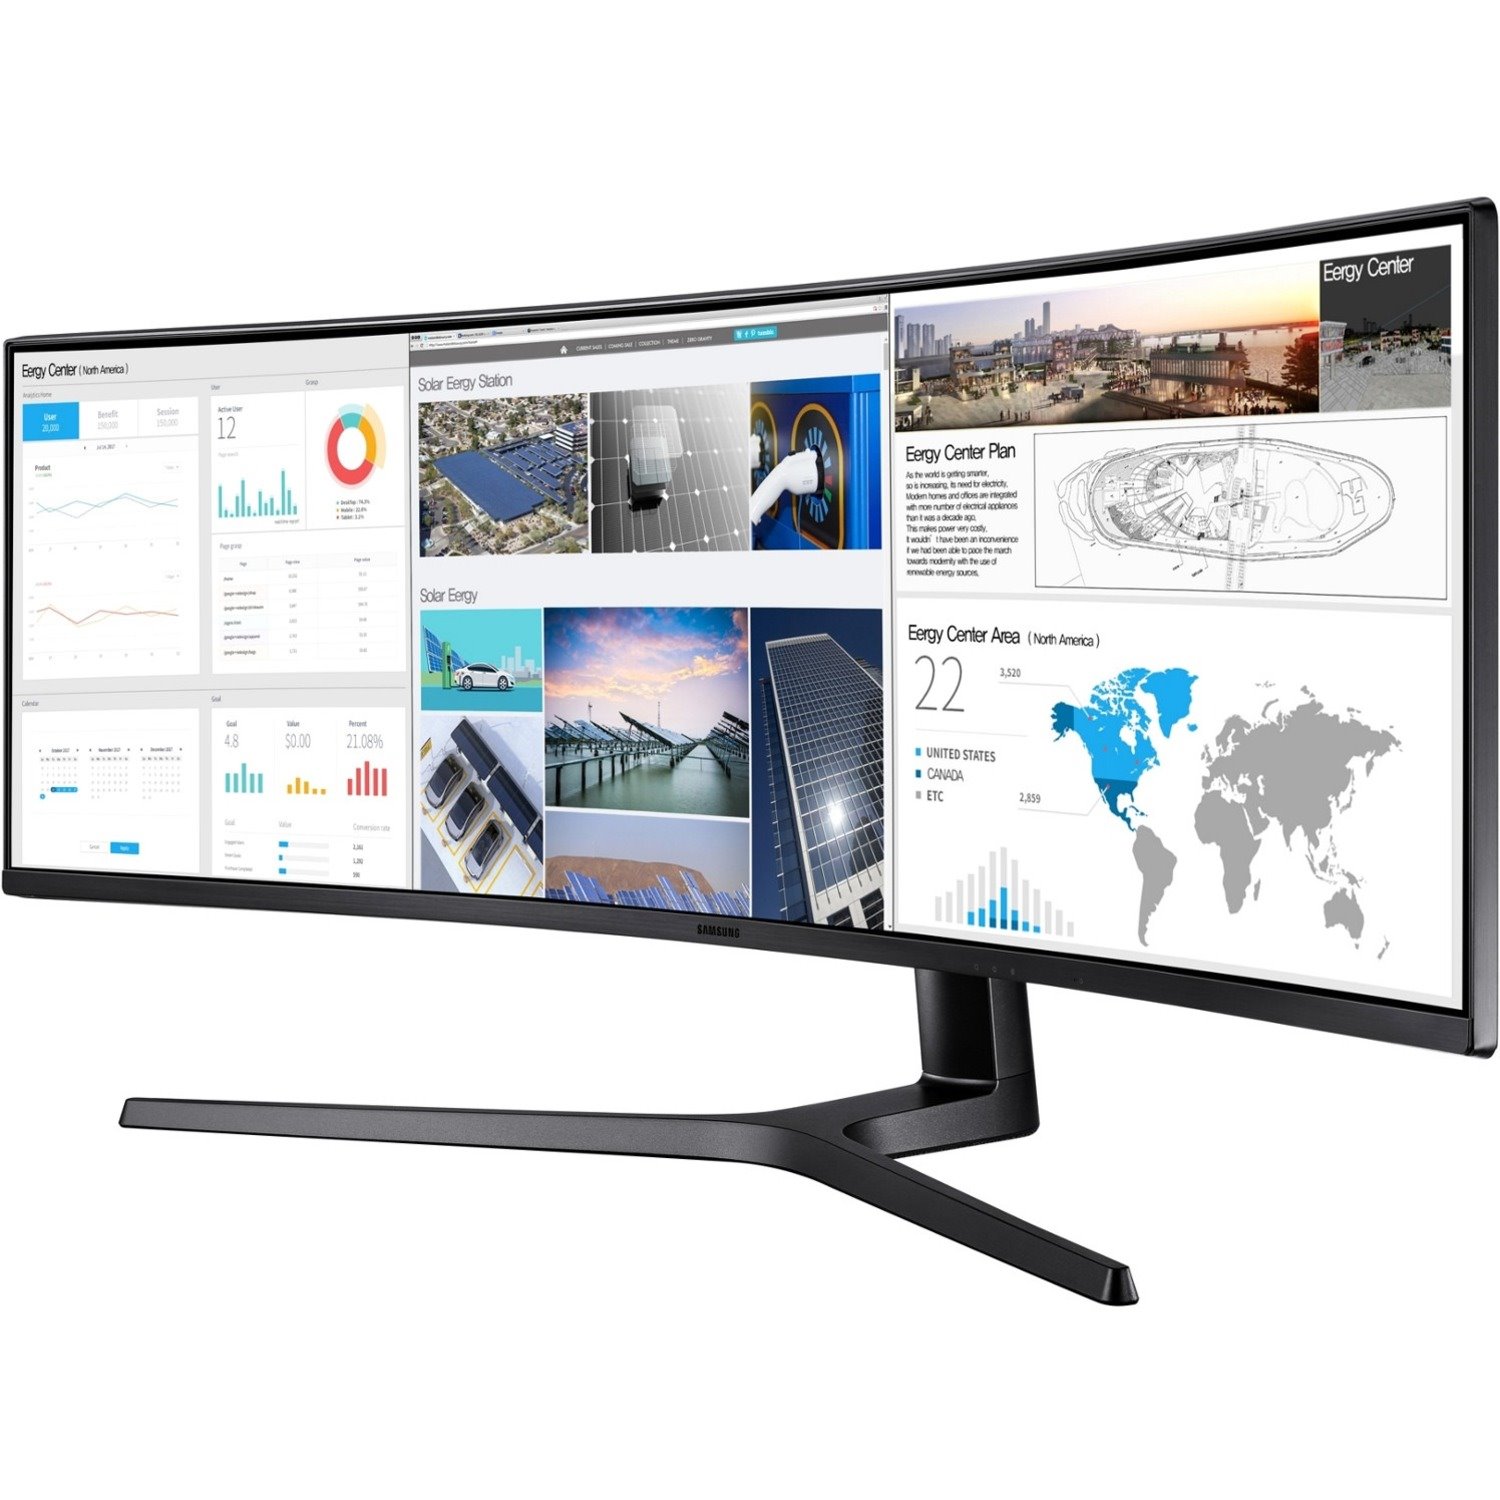 Samsung C49J89 49" Class Double Full HD (DFHD) Curved Screen LCD Monitor - 32:9 - Charcoal Black Hairline, Titanium